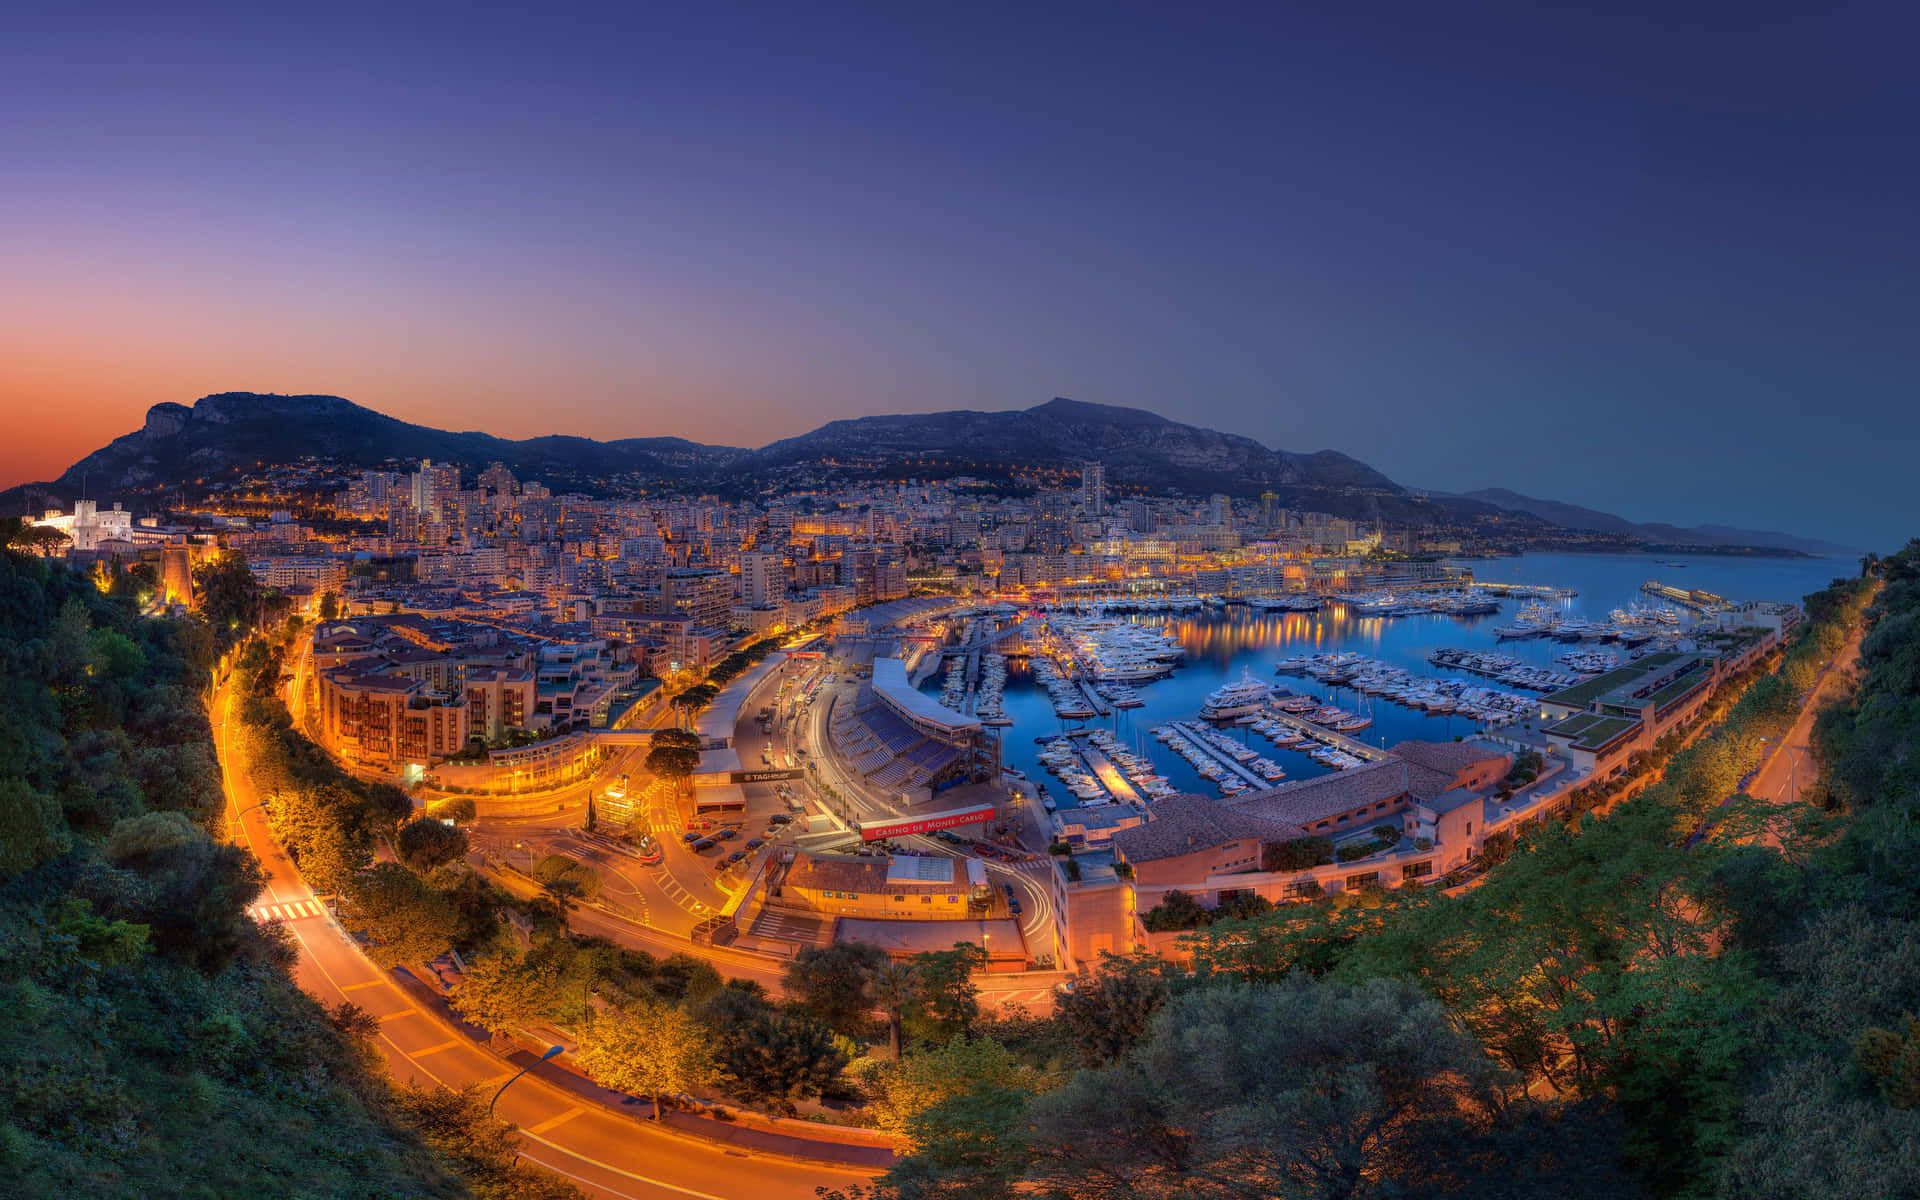 Take in the breath-taking views of the French Riviera from Monaco